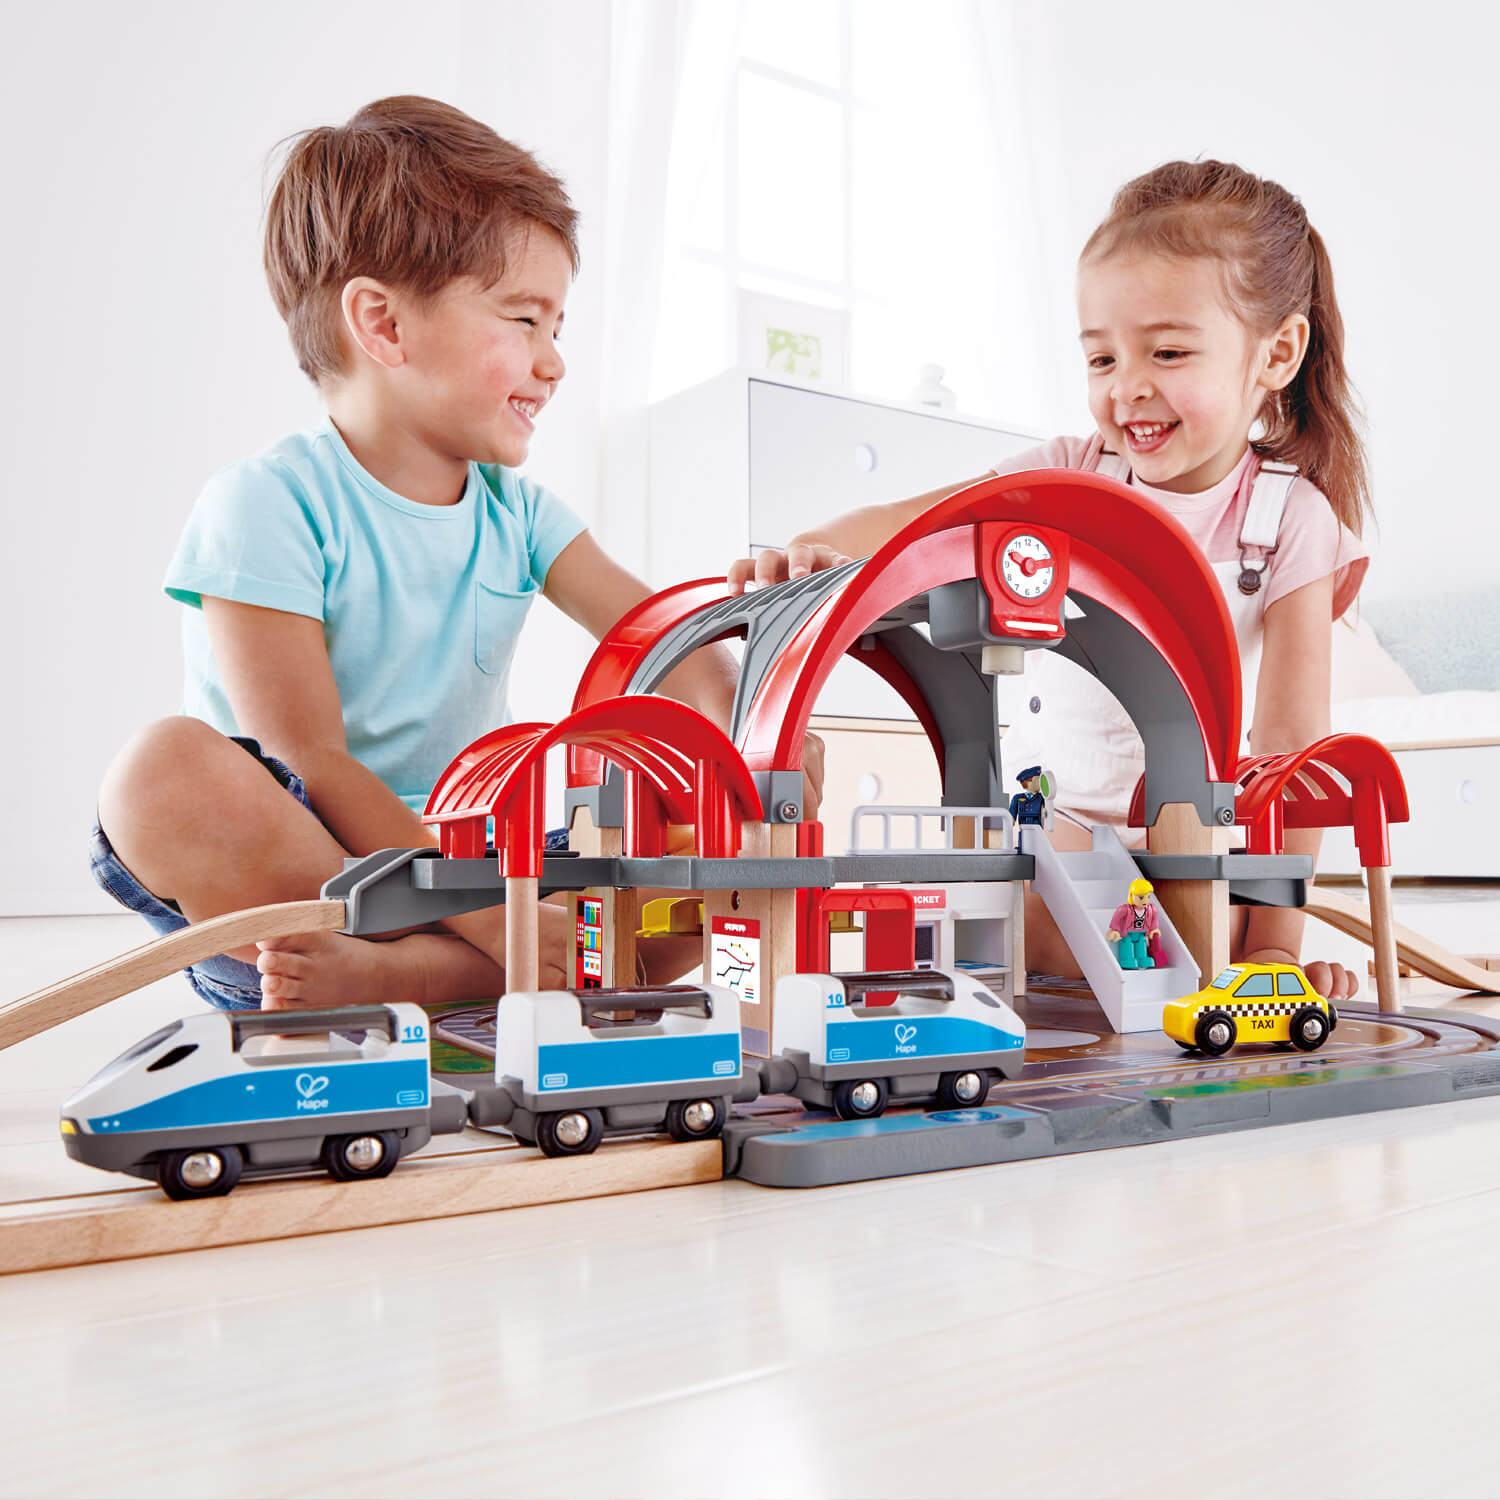 Boy and girl both play with the wooden tracks of the Hape rail grand city station.